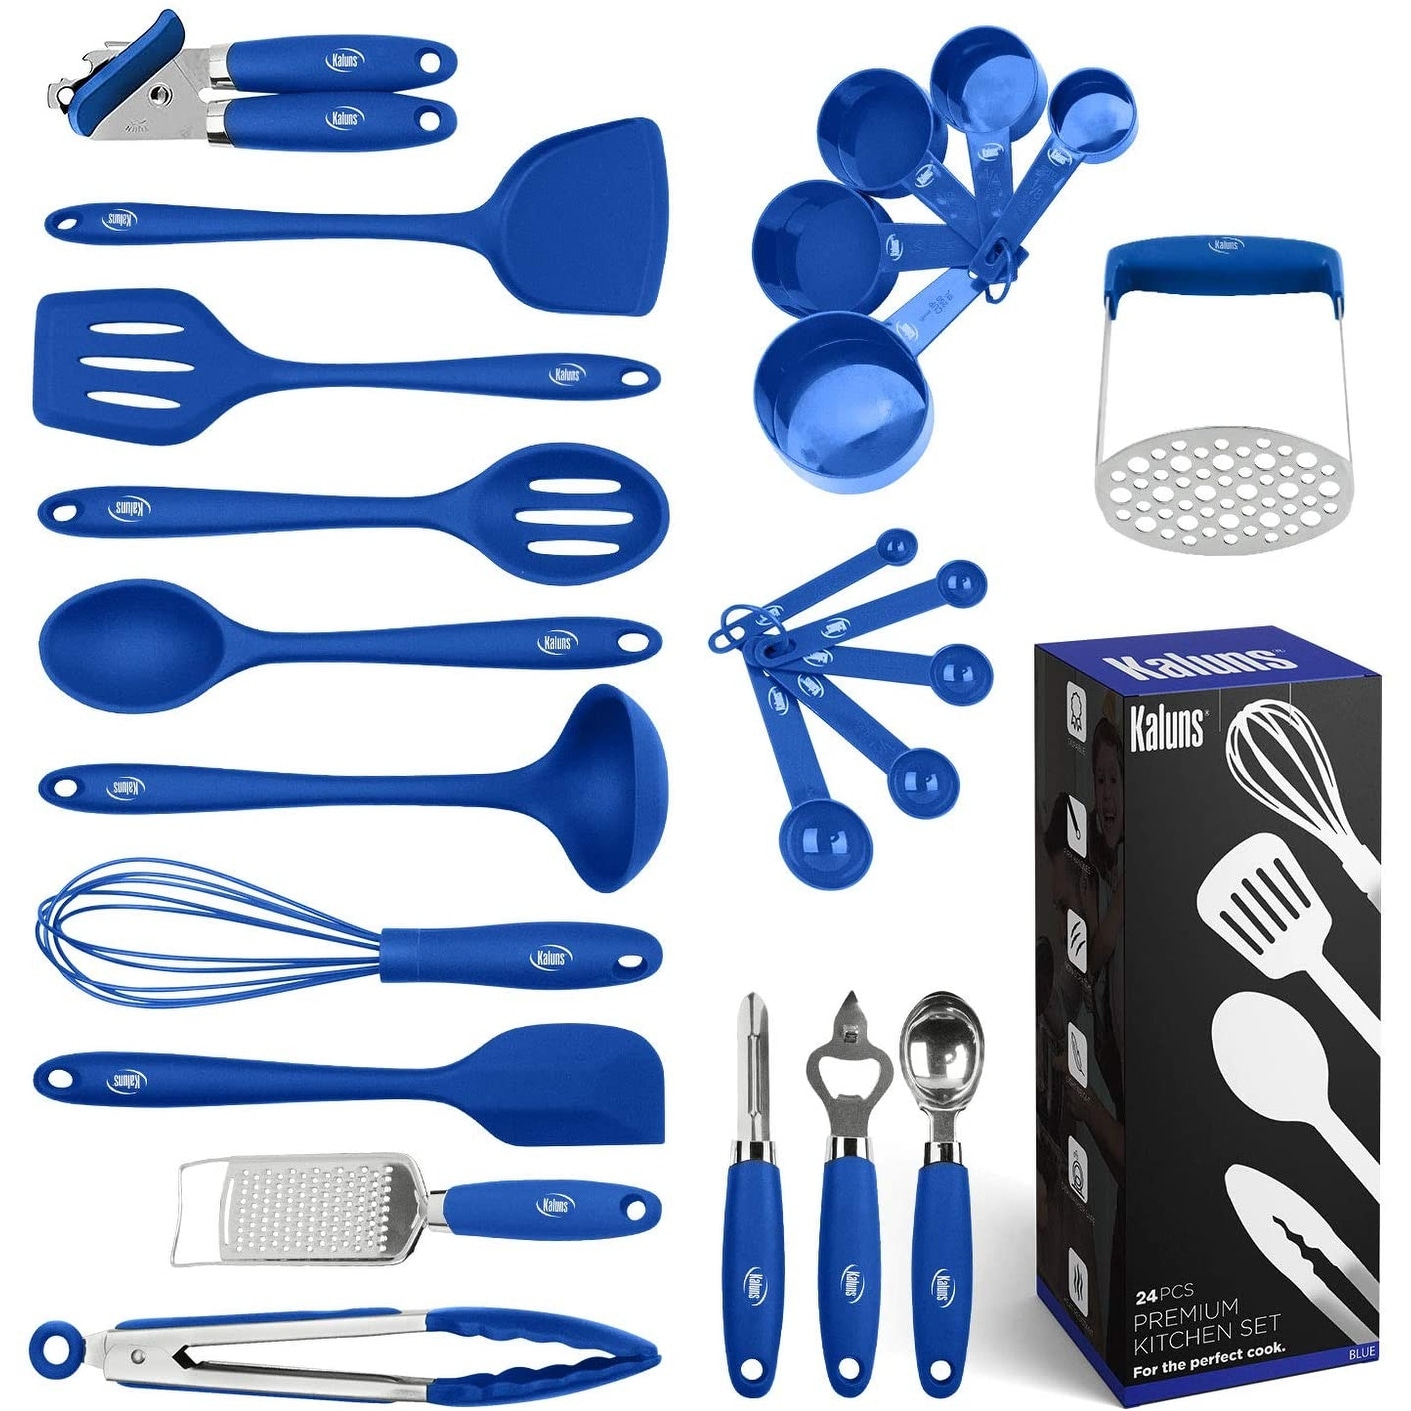 https://ak1.ostkcdn.com/images/products/is/images/direct/2bd451bb25b1f4ba30d5249fc8818ec830ee753b/Cooking-Utensils-Set%2C-24-Silicone-Kitchen-Utensils%2C-Non-Stick-and-Heat-Resistant-Kitchen-Tools%2C-Useful-Cooking-Gadgets.jpg